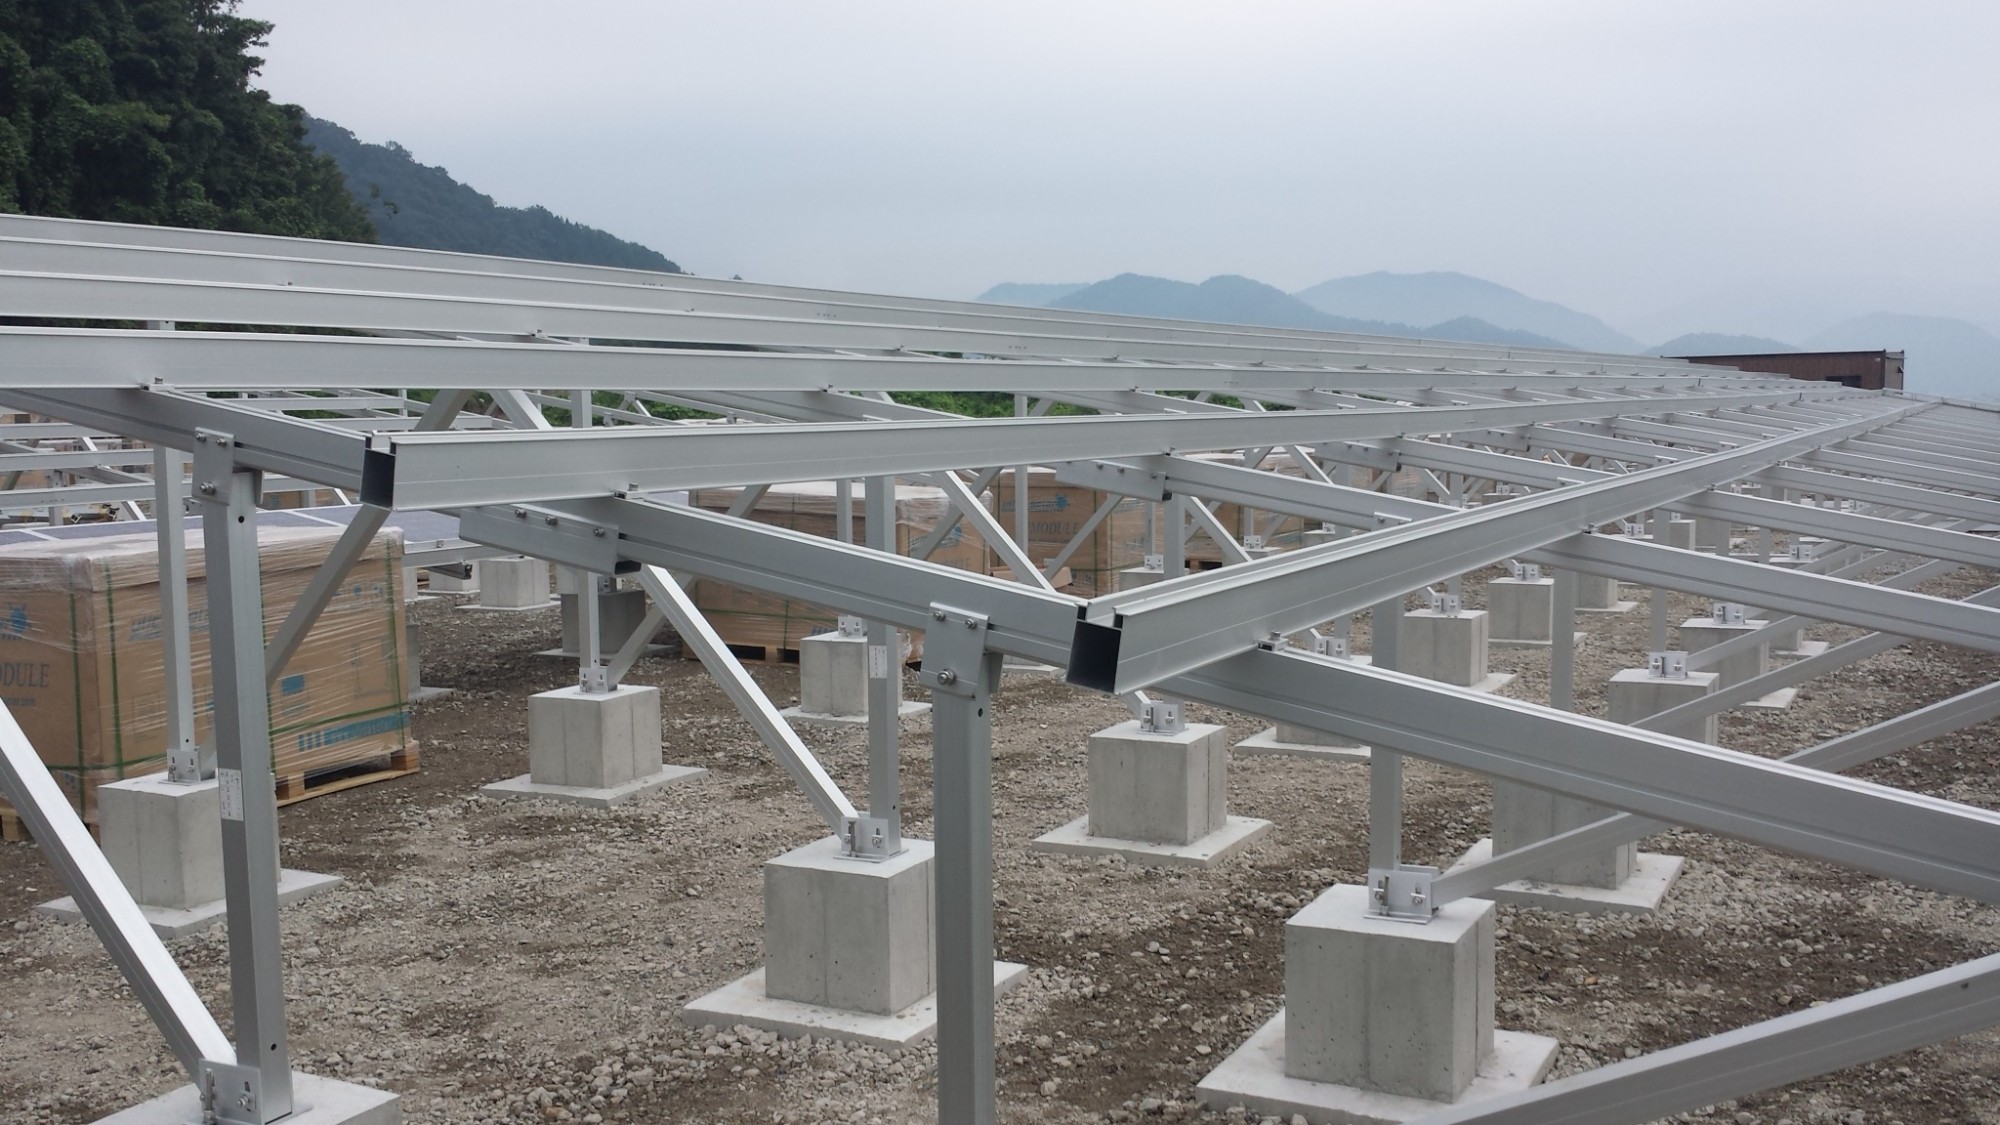 Concret ballast solar energy Mounting Systems